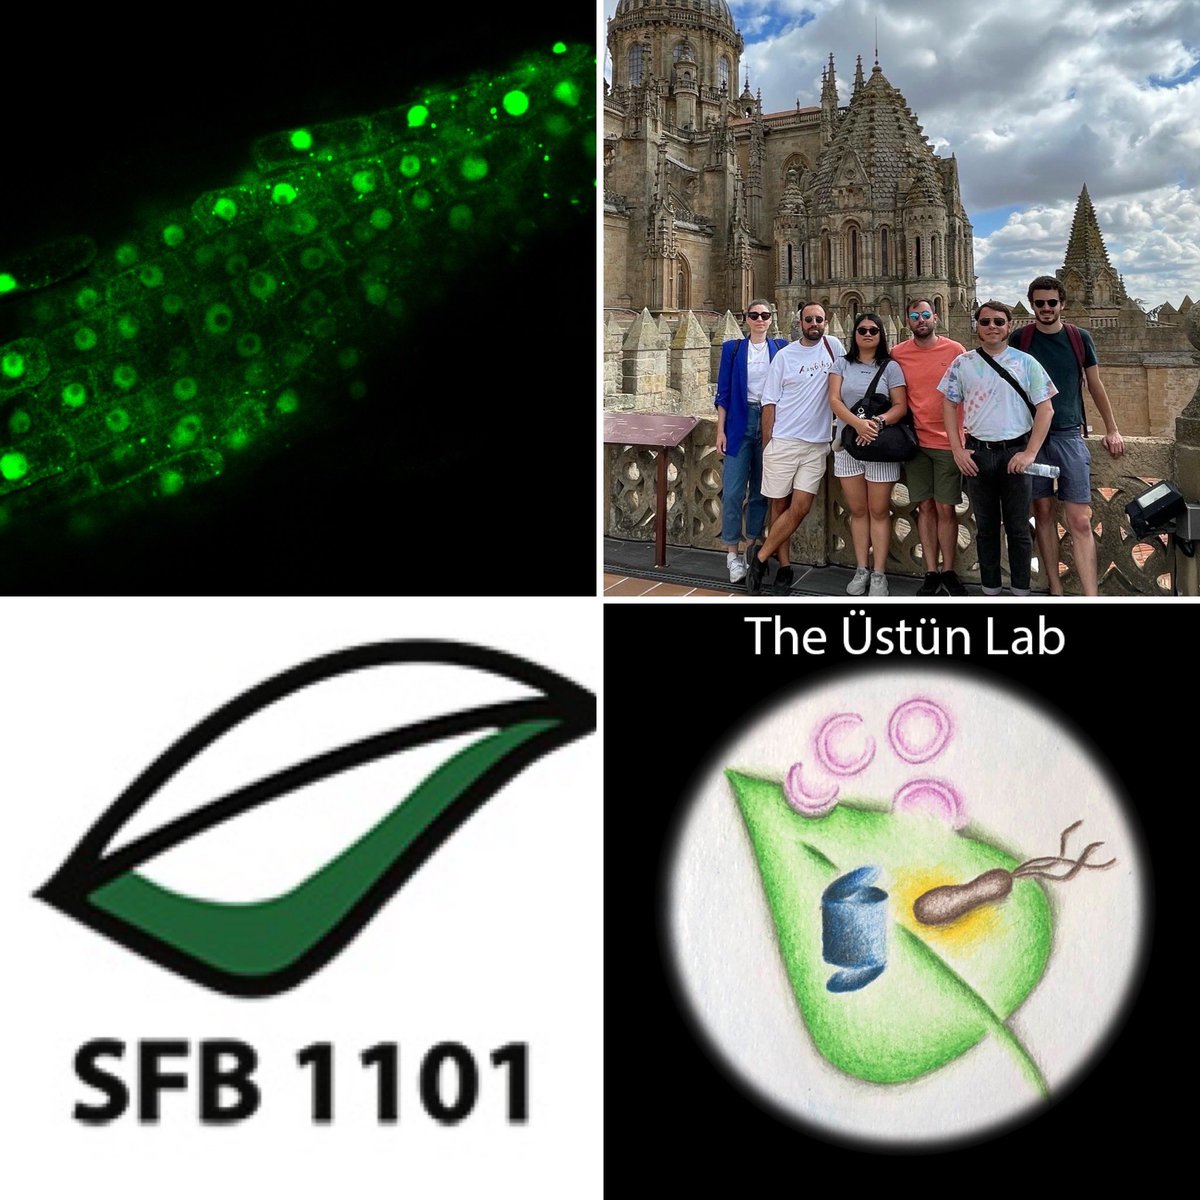 We have a @sfb1101 funded #PhD position available in #theustunlab from 01/2023. The SFB1101 project is about #proteostasis in the context of different proteotoxic stresses (see also theustunlab.com/projects/) #PlantSciJobs #PhDposition (1/3)